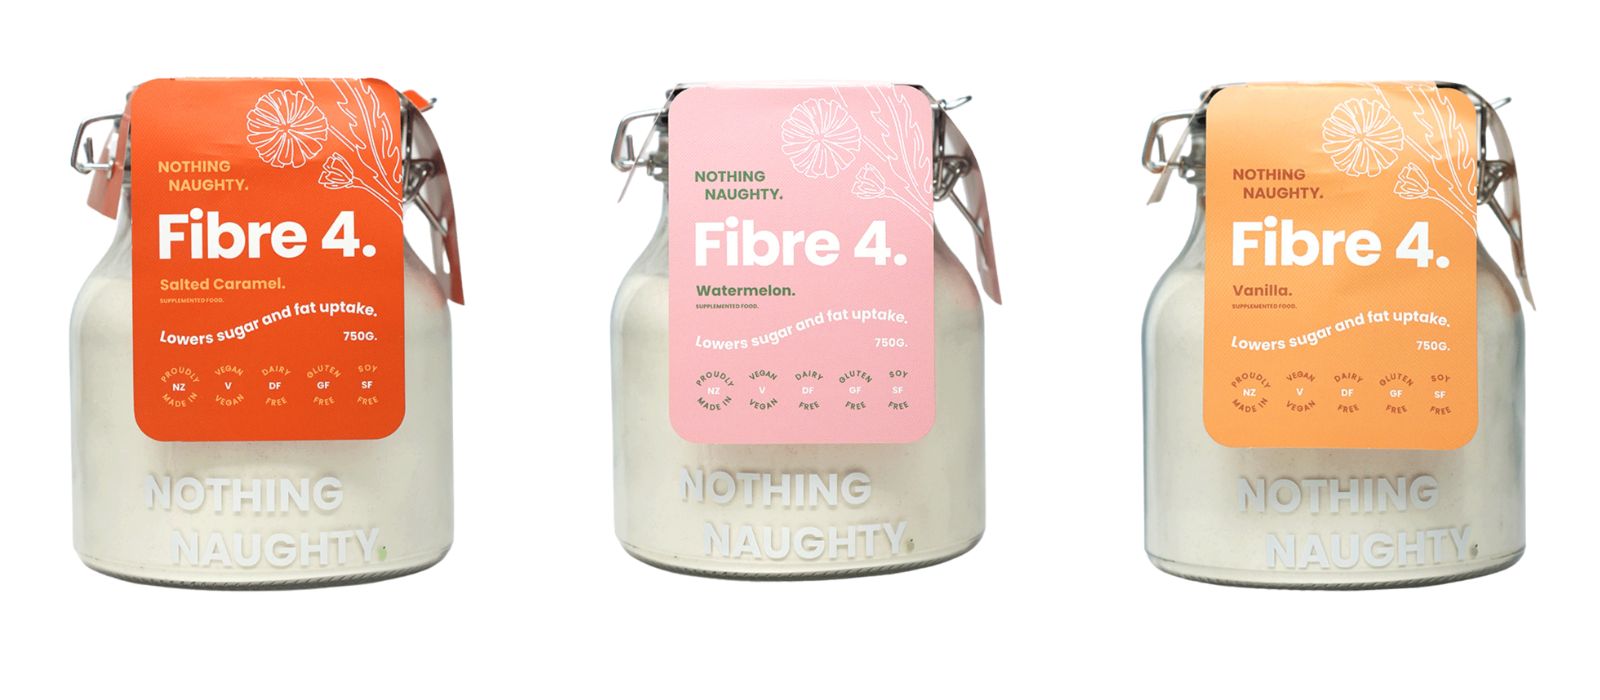 Nothing Naughty Fibre 4 product flavours